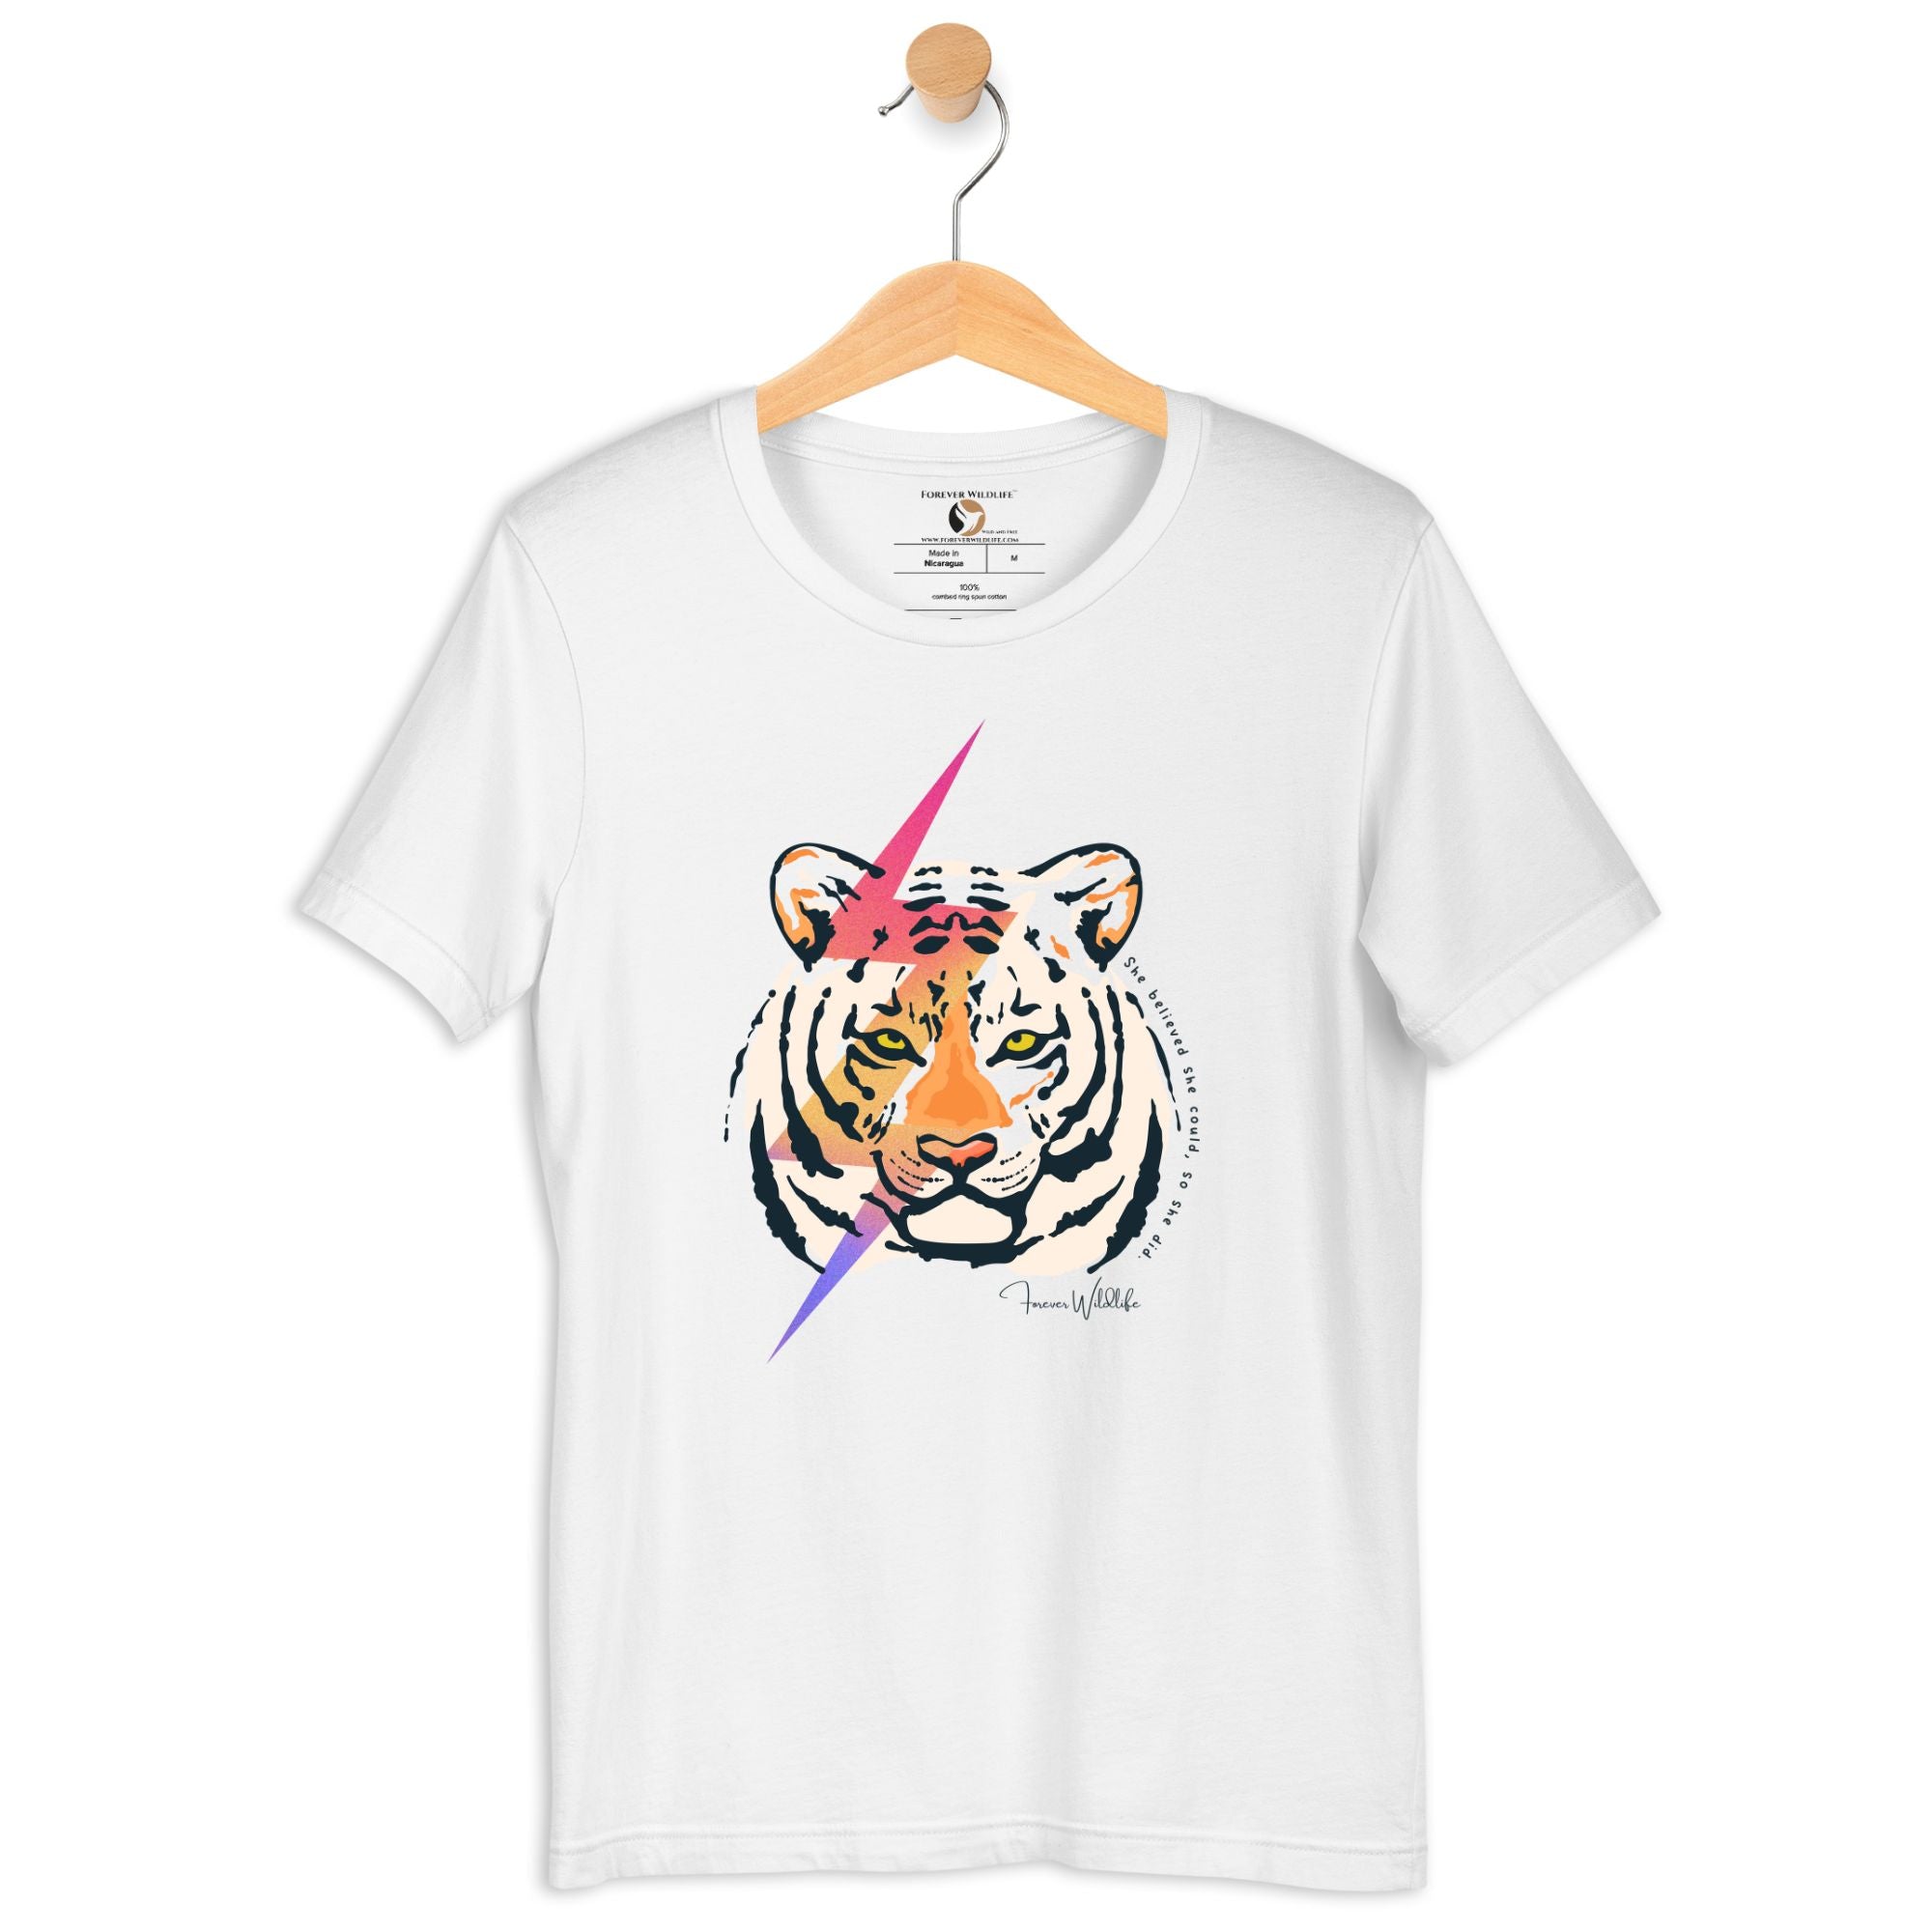 Tiger T-Shirt in White – Premium Wildlife T-Shirt Design with She Believed She Could So She Did Text, Tiger Shirts & Wildlife Clothing